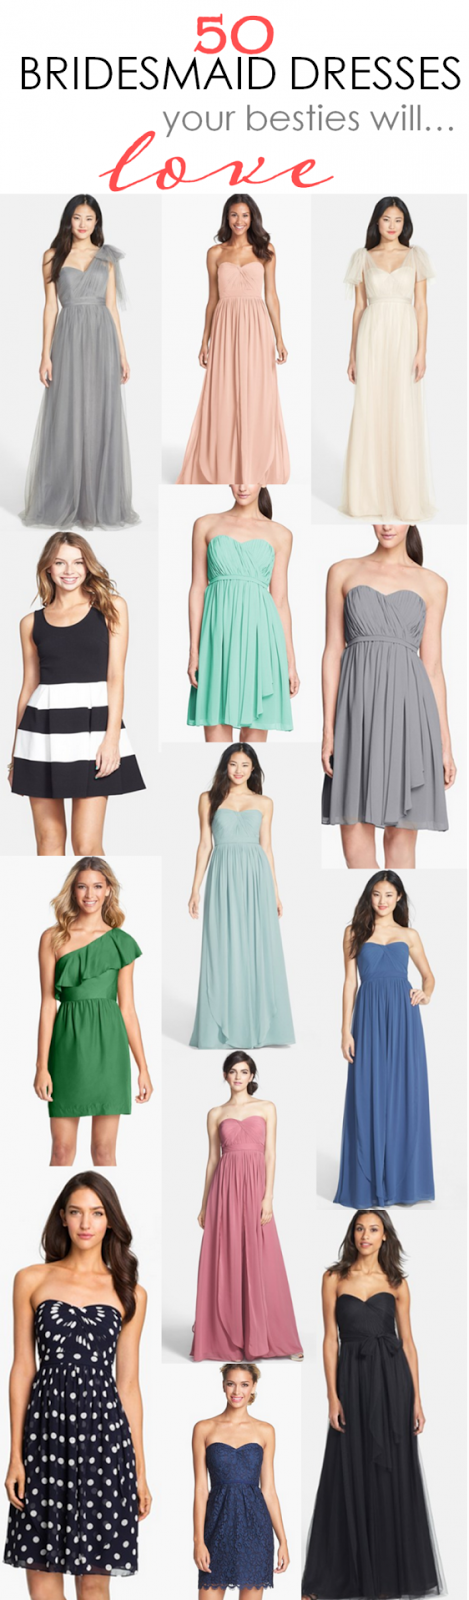 50 Bridesmaid Dresses Your Besties will Love! | The Perfect Palette